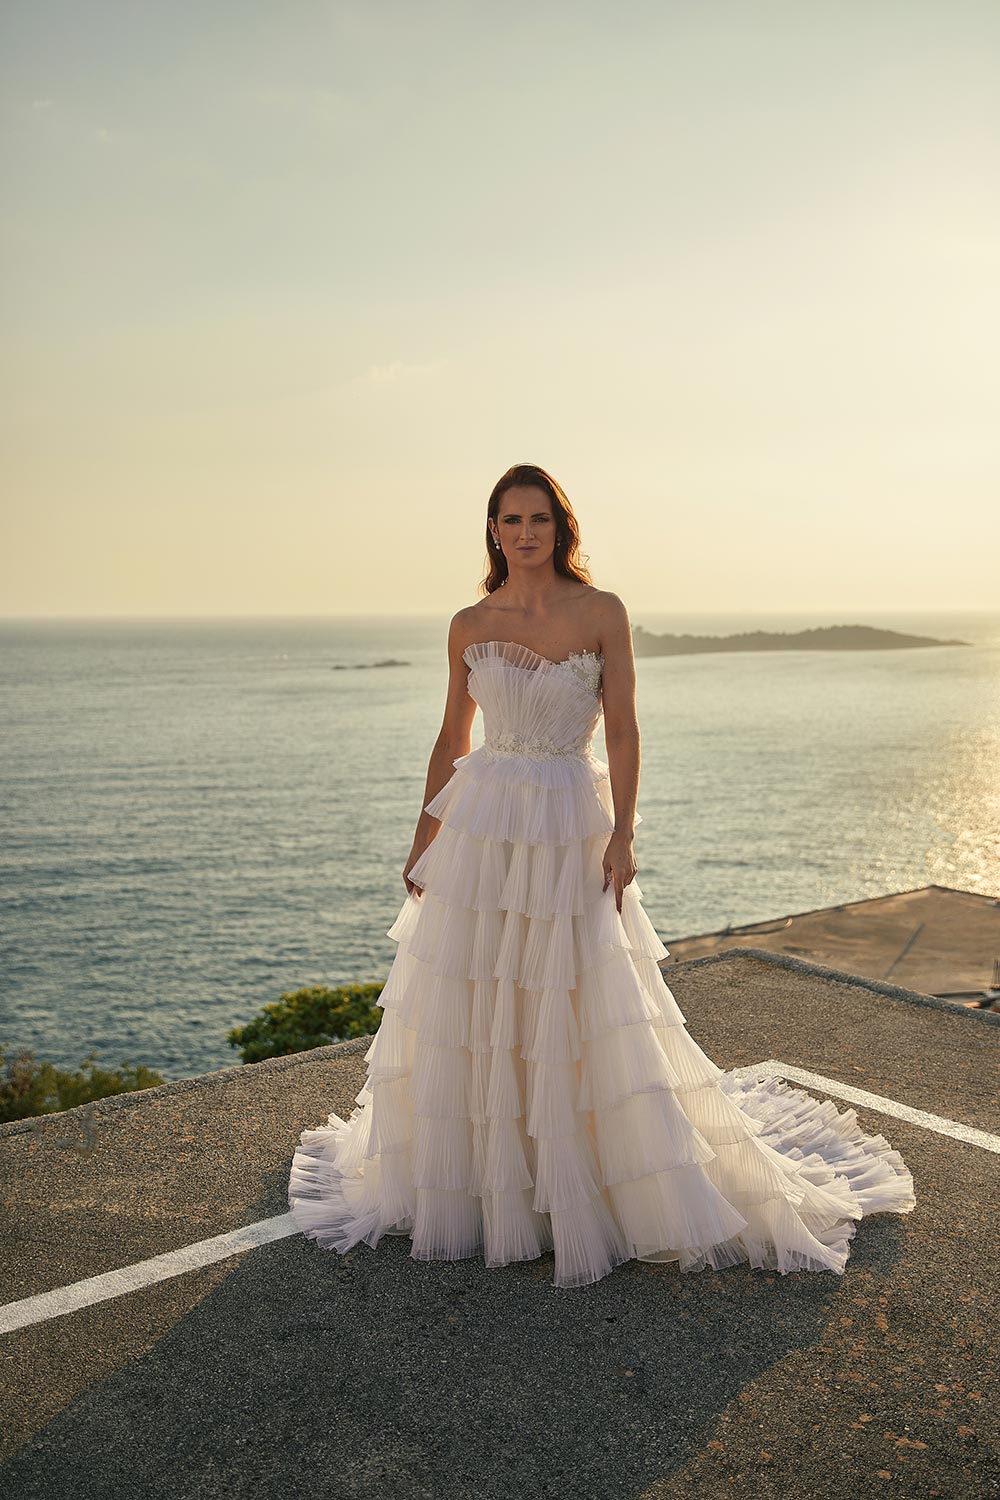 Experience Antonia, a bridal gown with drama & detail. Features 3D lace, a semi-sheer bodice, and layers of pleated silk draping on a ball gown silhouette. Vinka Design